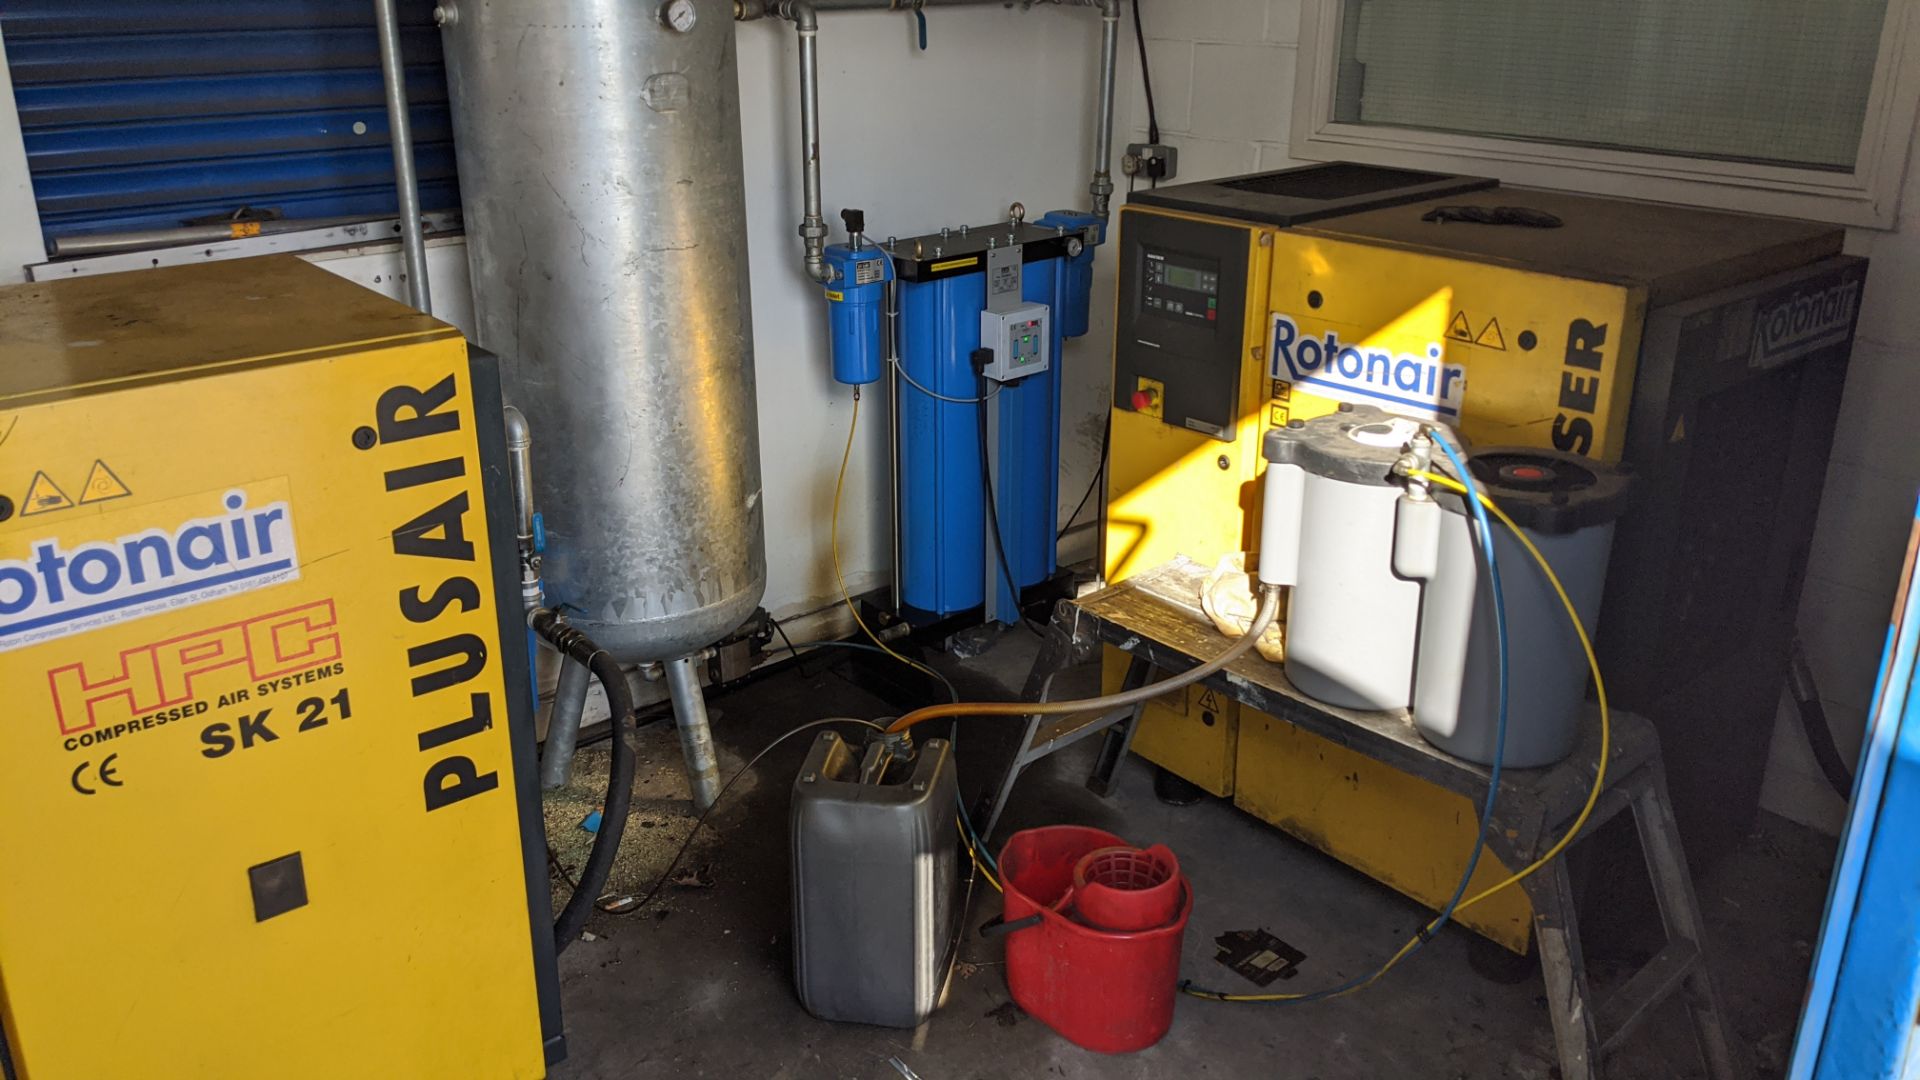 Contents of the compressor house comprising 2 off 2005 HPC Plusair model SK21 compressors plus - Image 4 of 24